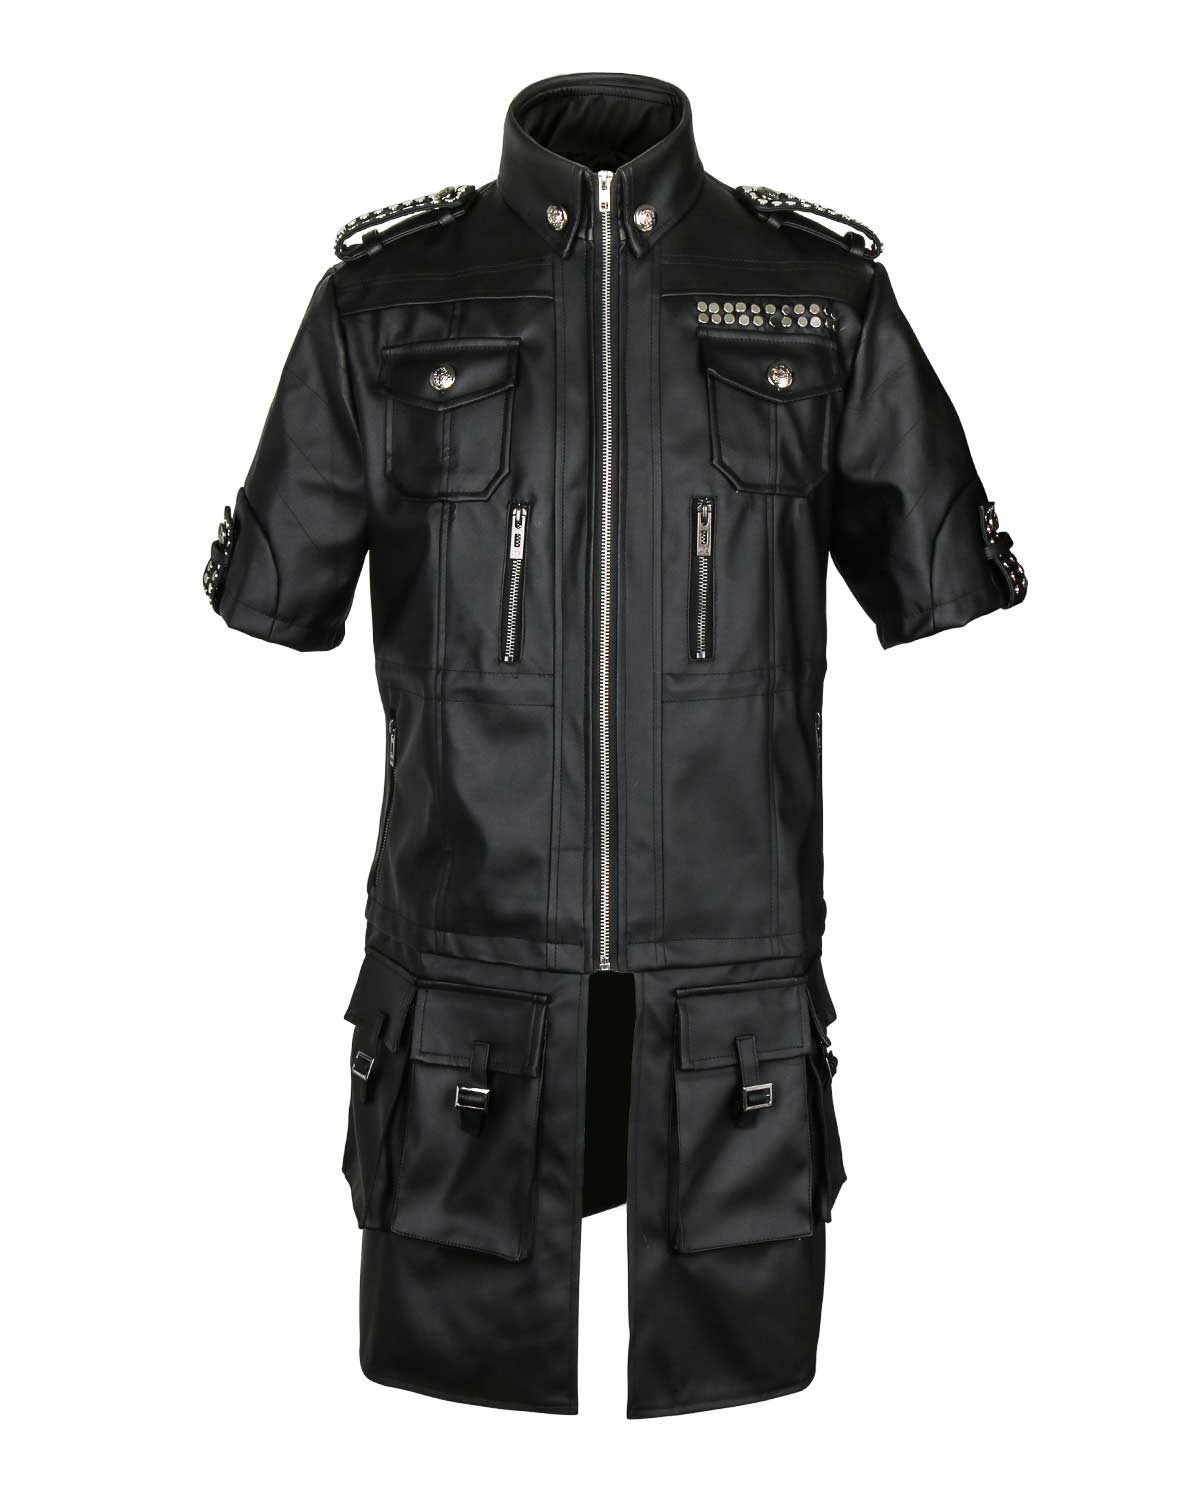 Noctis Lucis Caelum Final Fantasy XV Cosplay Costume Full Set Outfits